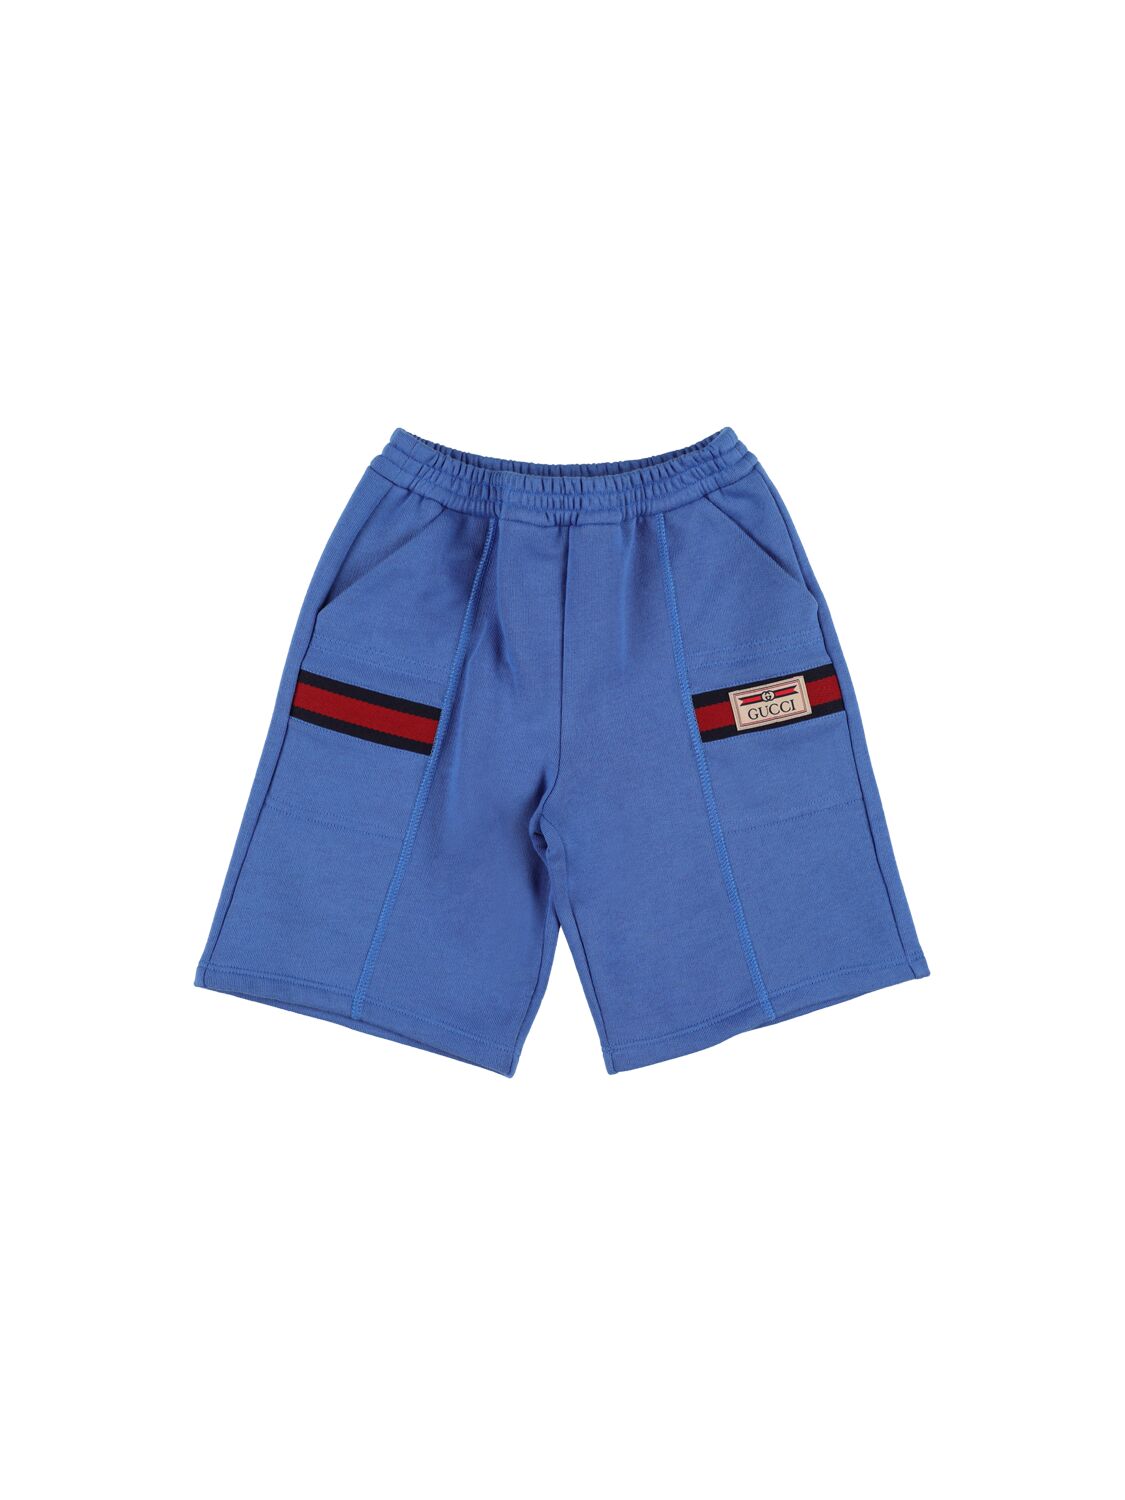 Image of Cotton Blend Jersey Shorts